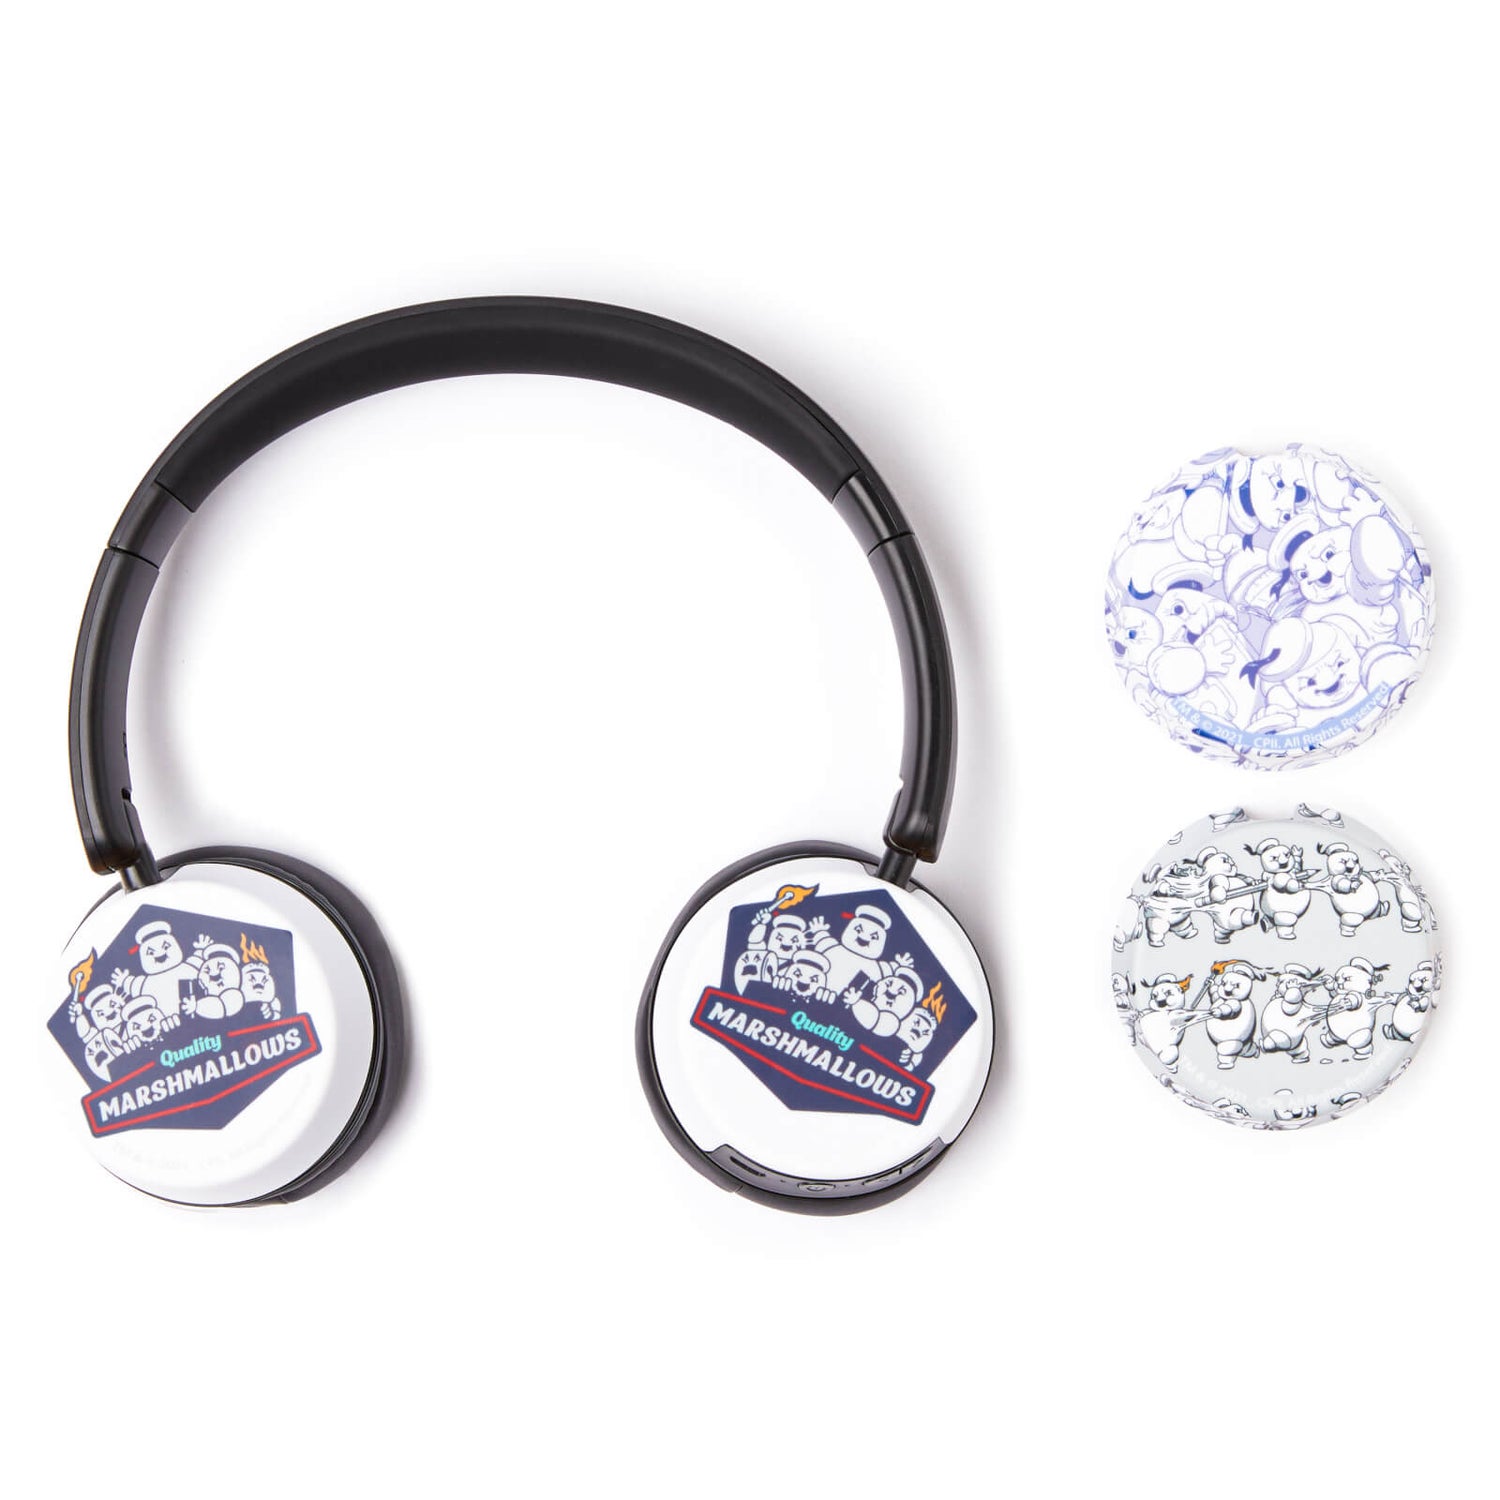 MOTH x Ghostbusters Stay-Puft On-Ear Headphones & Caps